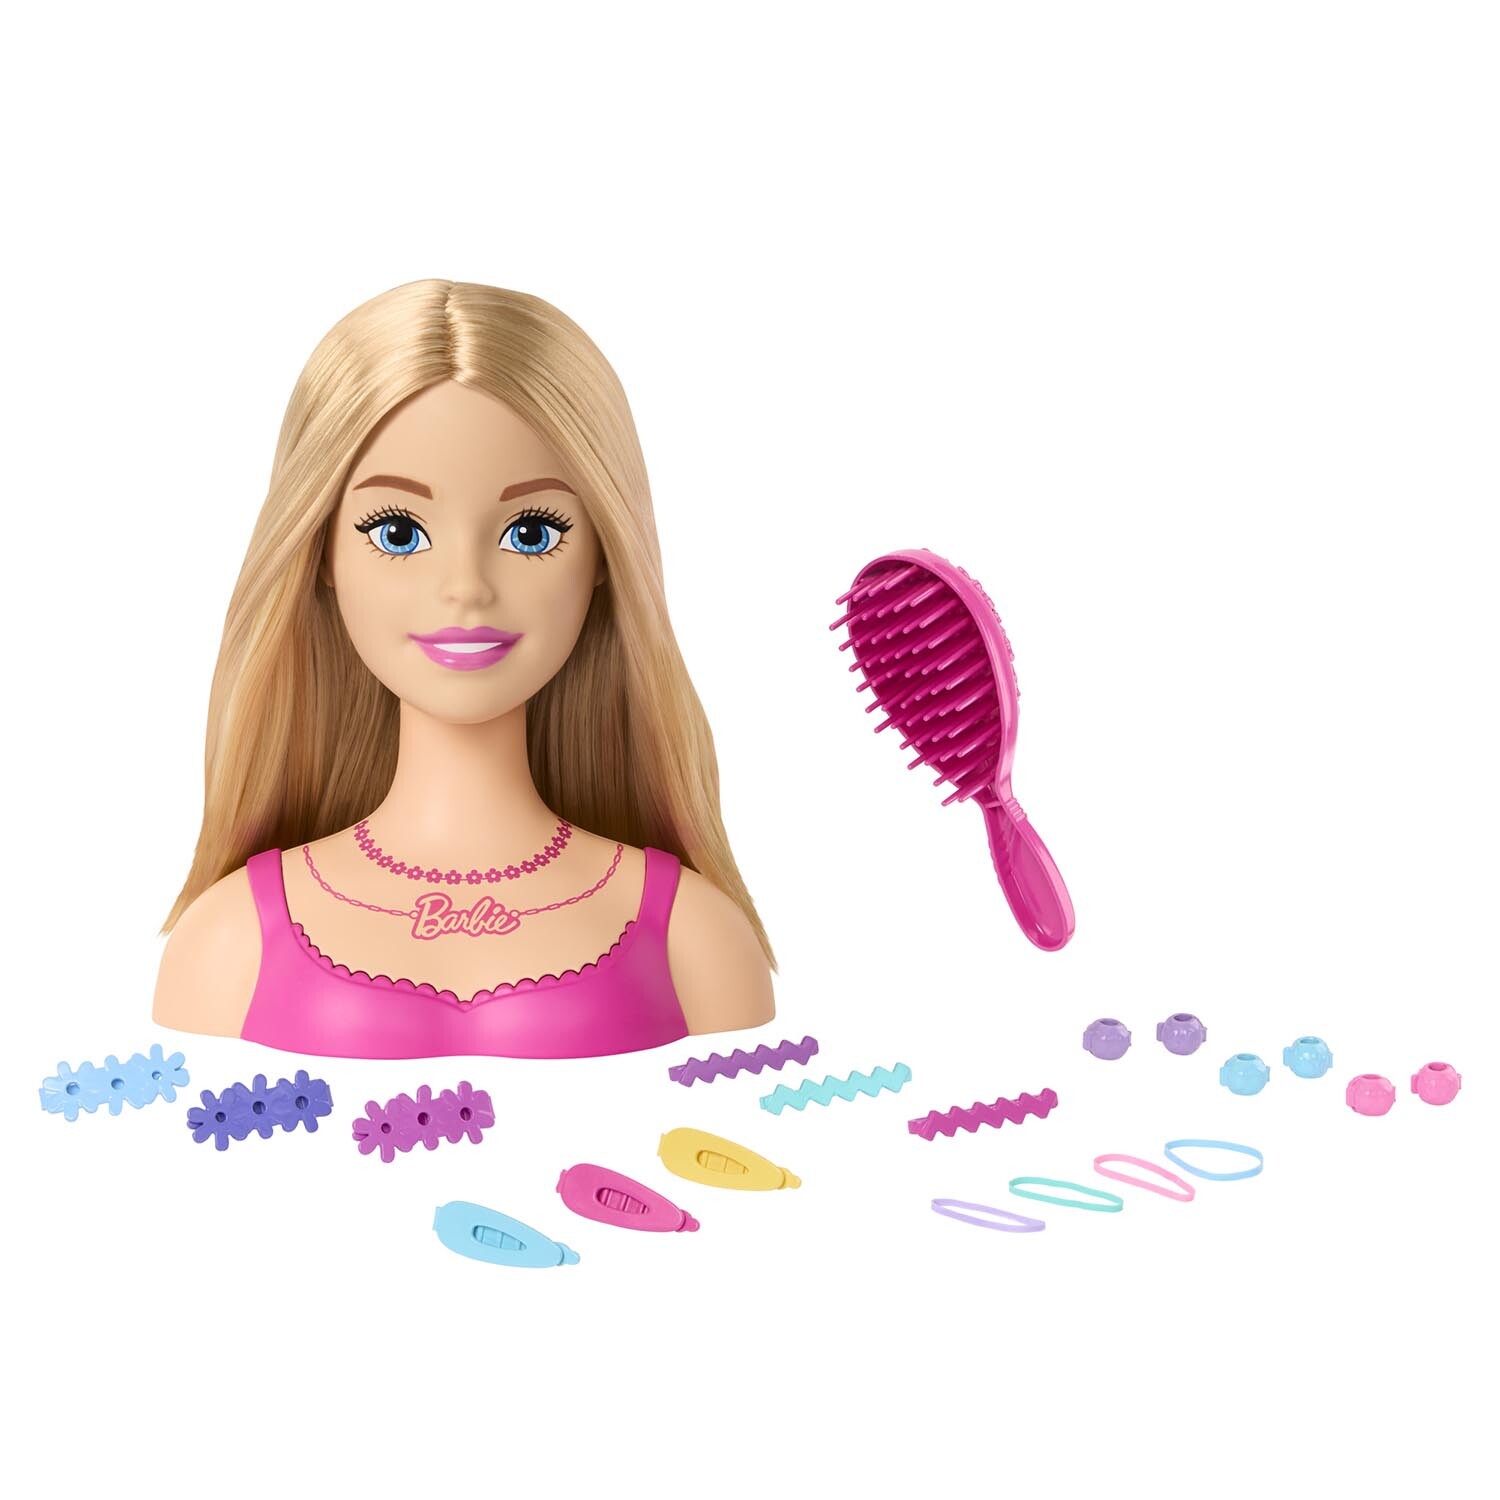 Barbie Styling Head and Accessories - Pink Image 9